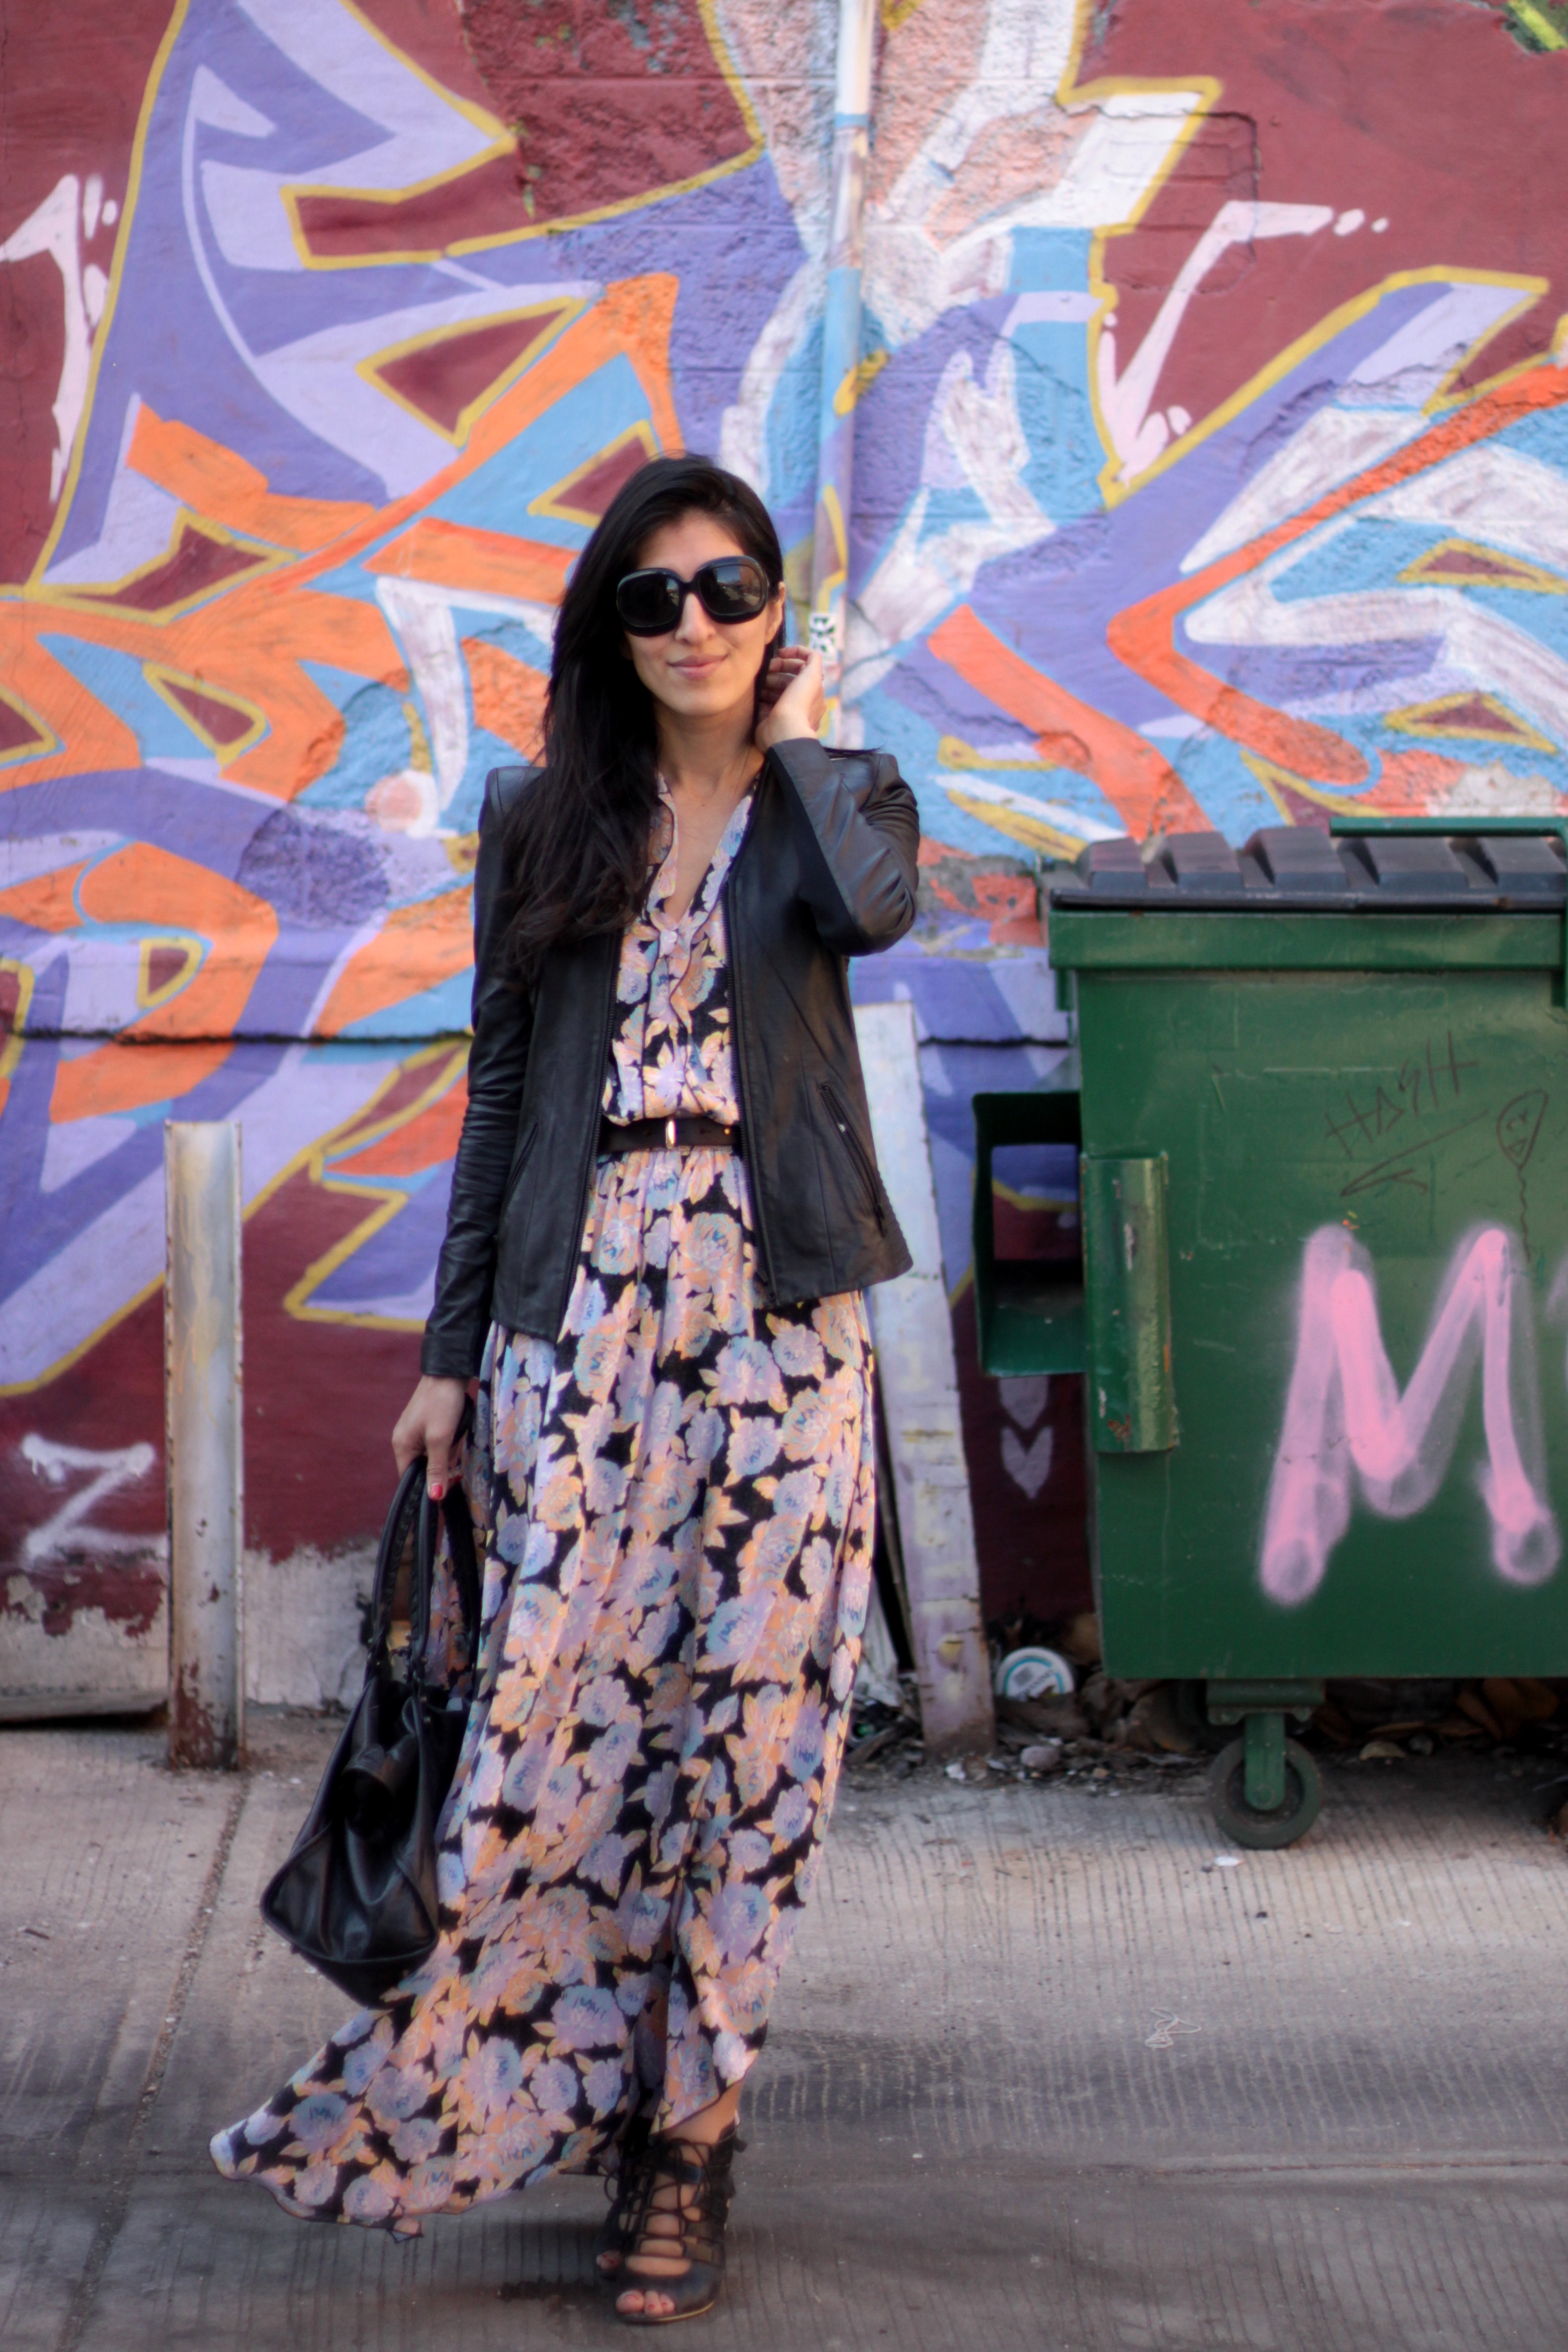 Feeling VERY "Devil Wears Prada" here with the pastel florals against an urban landscape :D 